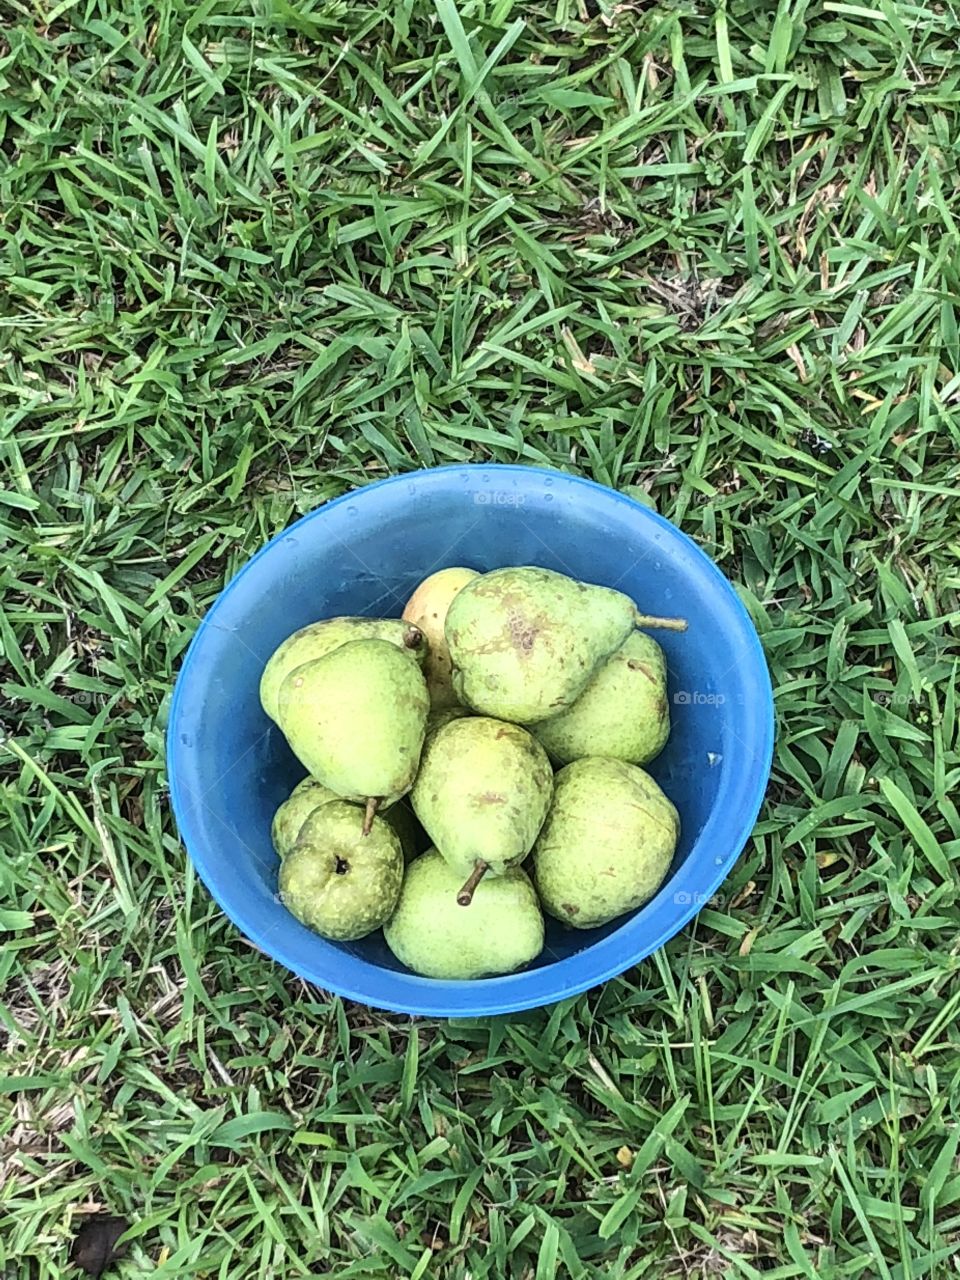 Bowl of fresh picked green pears in the grass. 